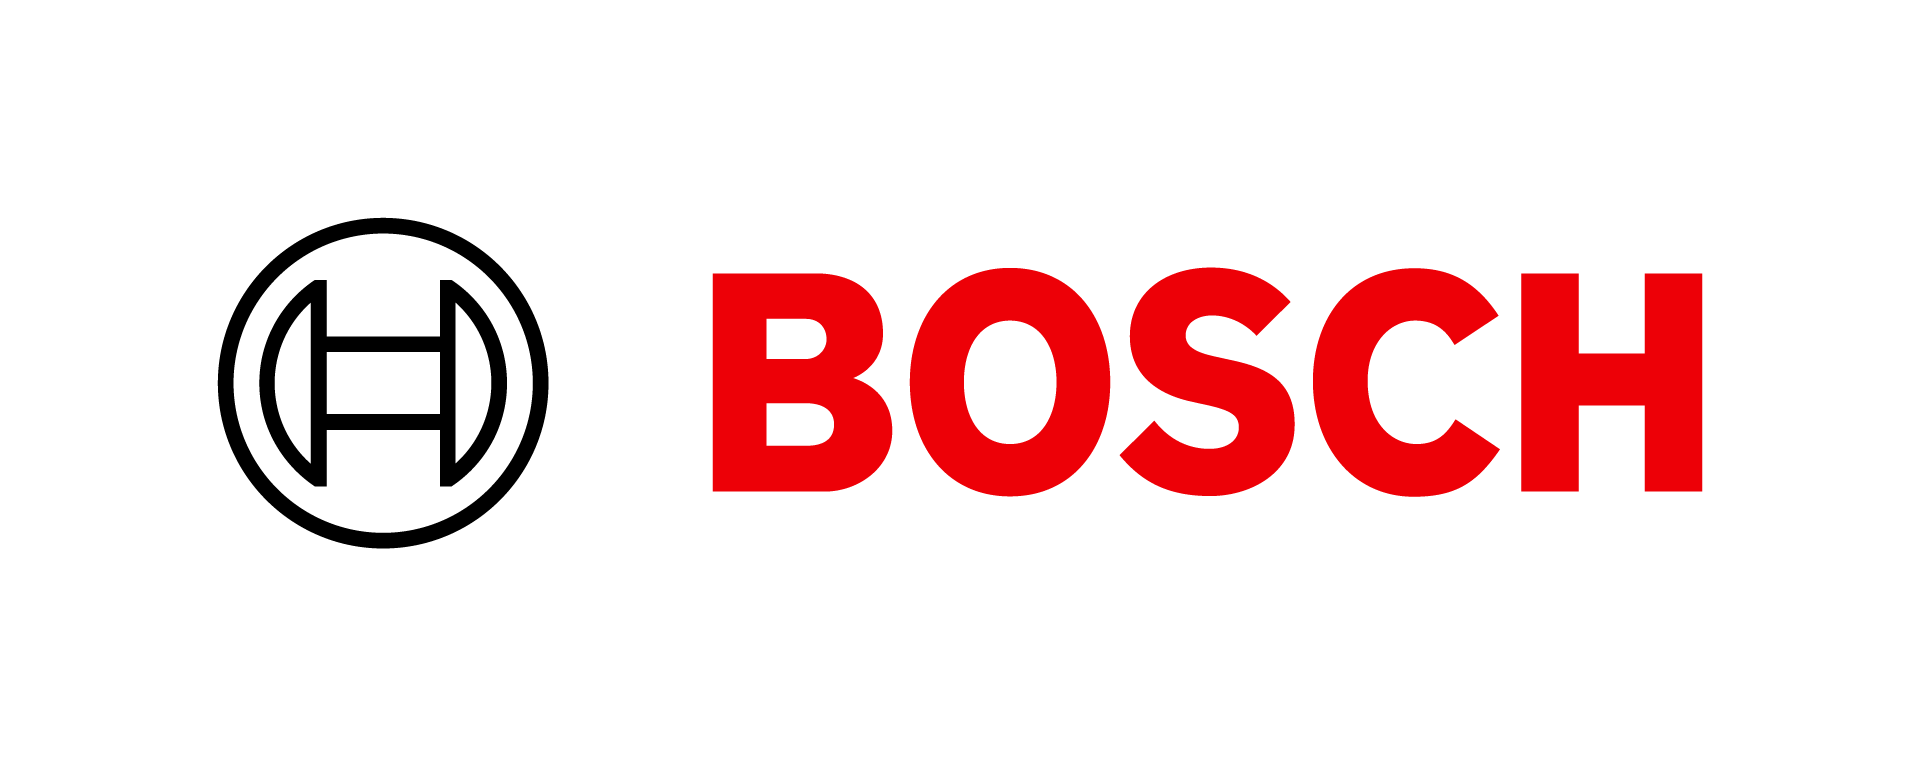 Bosch Energy and Building Solutions B.V.